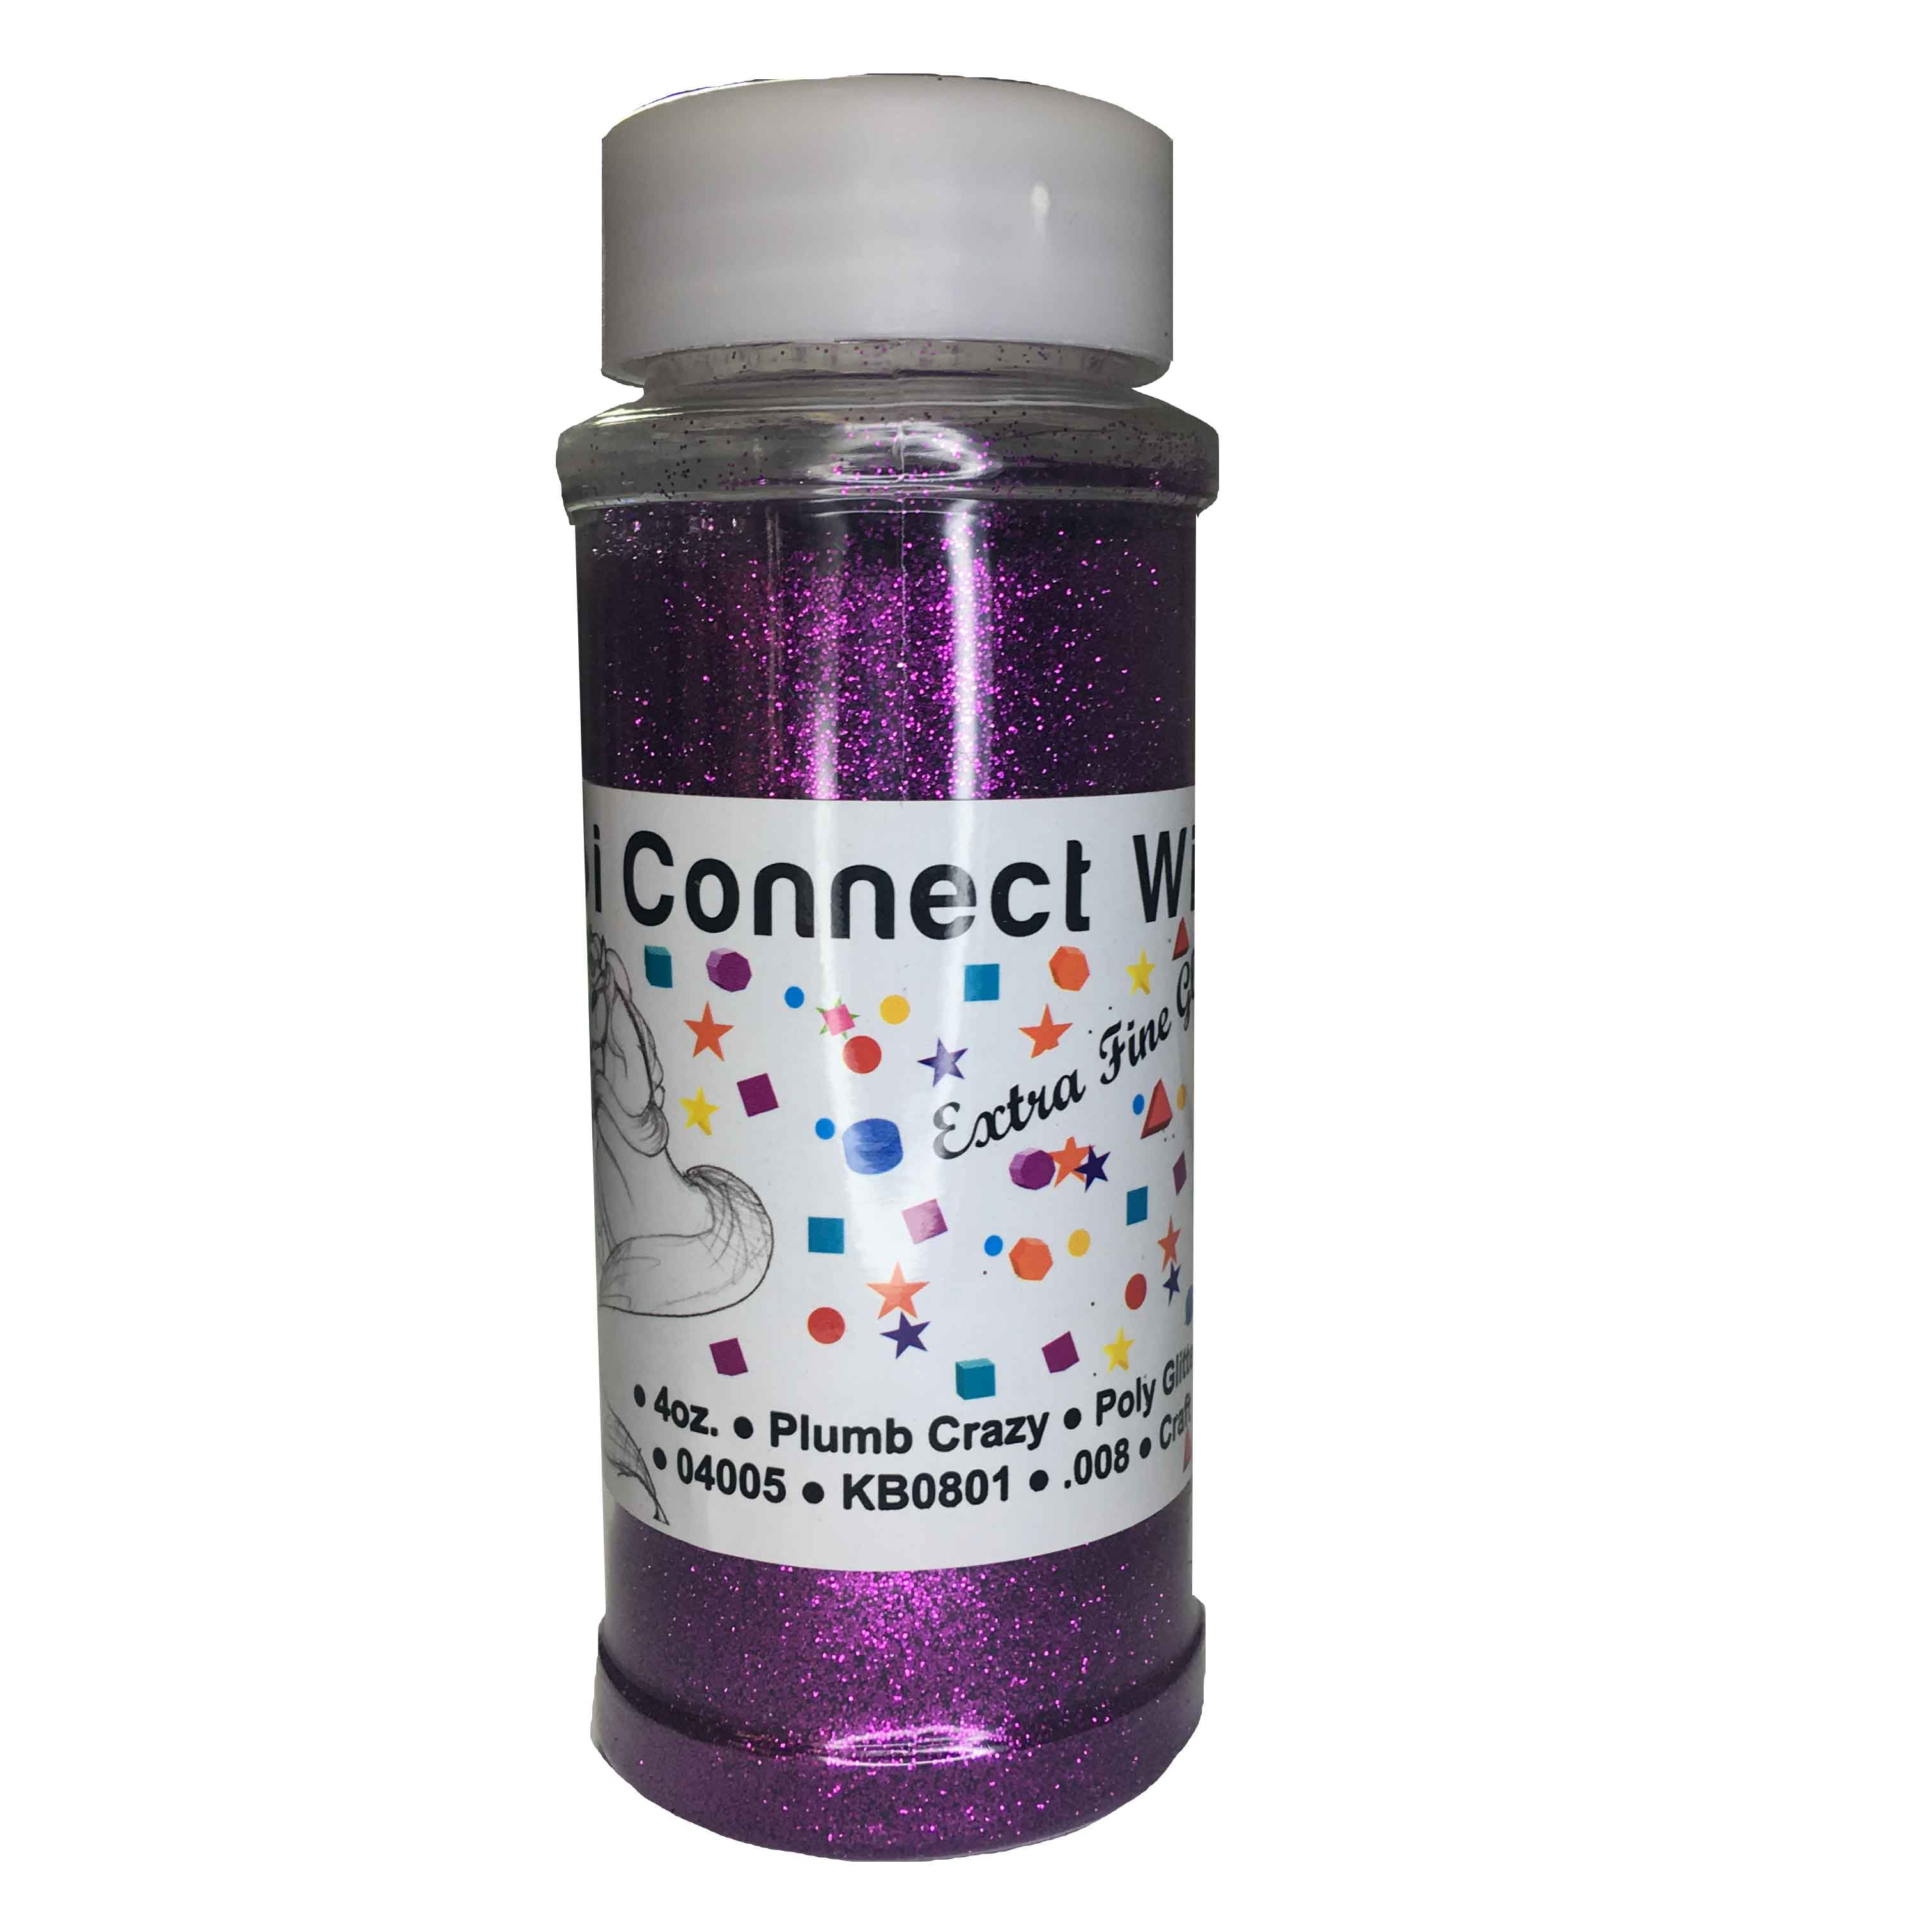 Sulyn Extra Fine Glitter for Crafts, Ruby Red, 2.5 oz - Walmart.com